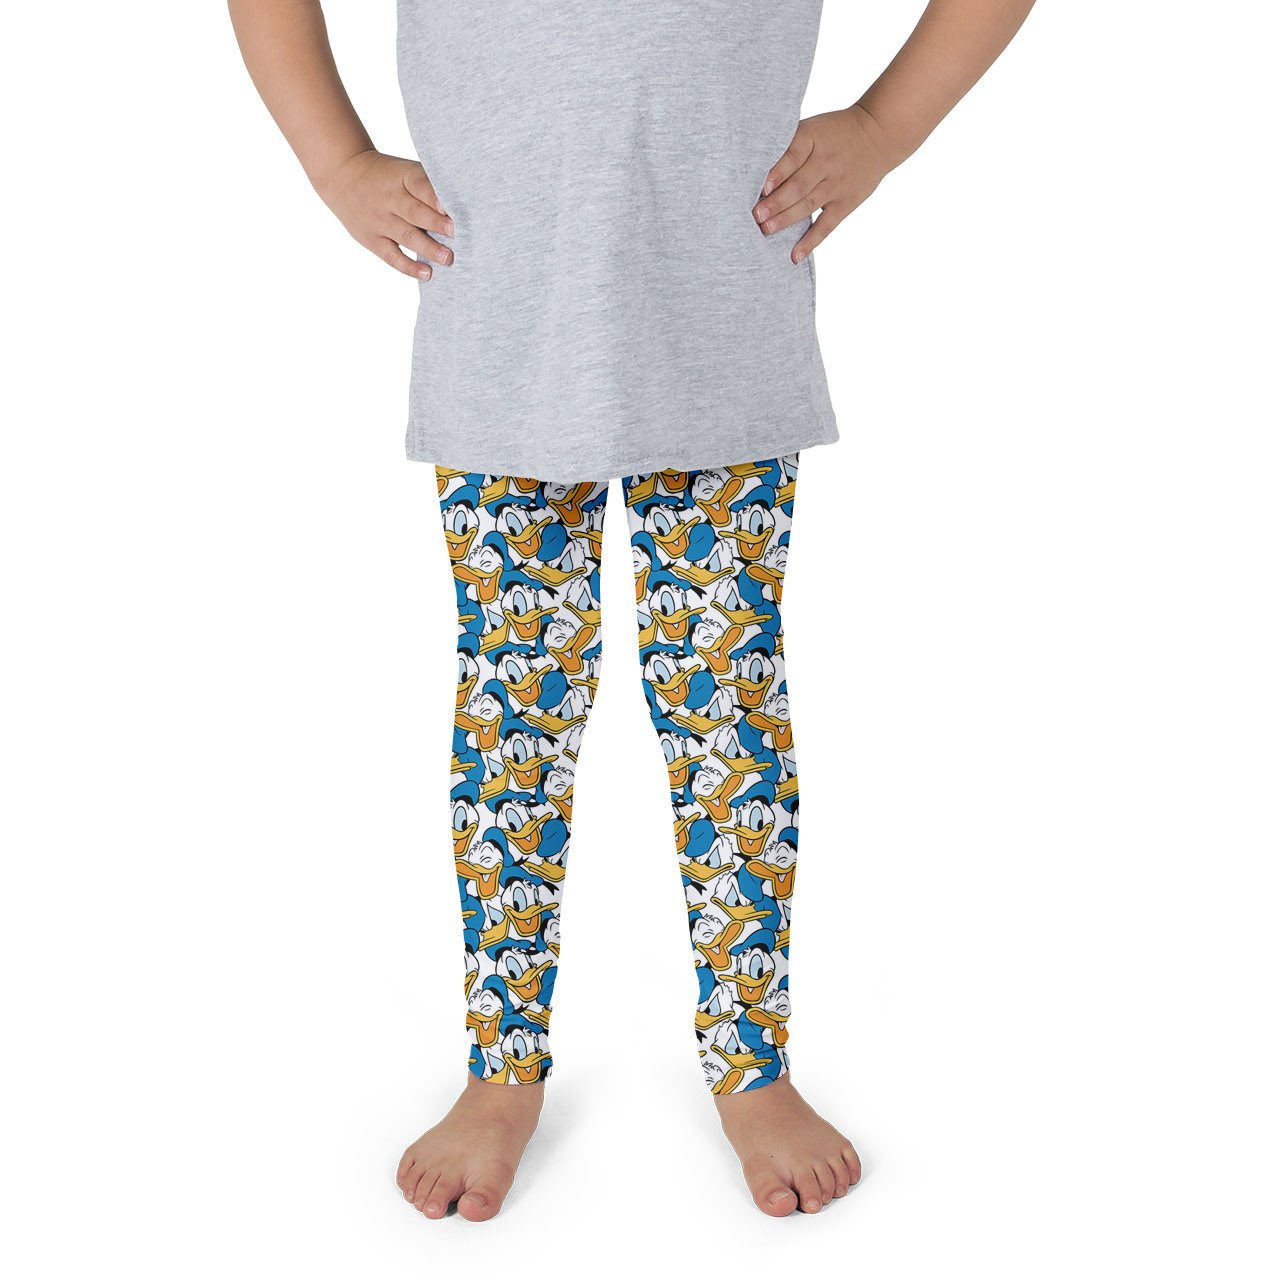 Girls' Leggings - Many Faces of Donald Duck - Rainbow Rules